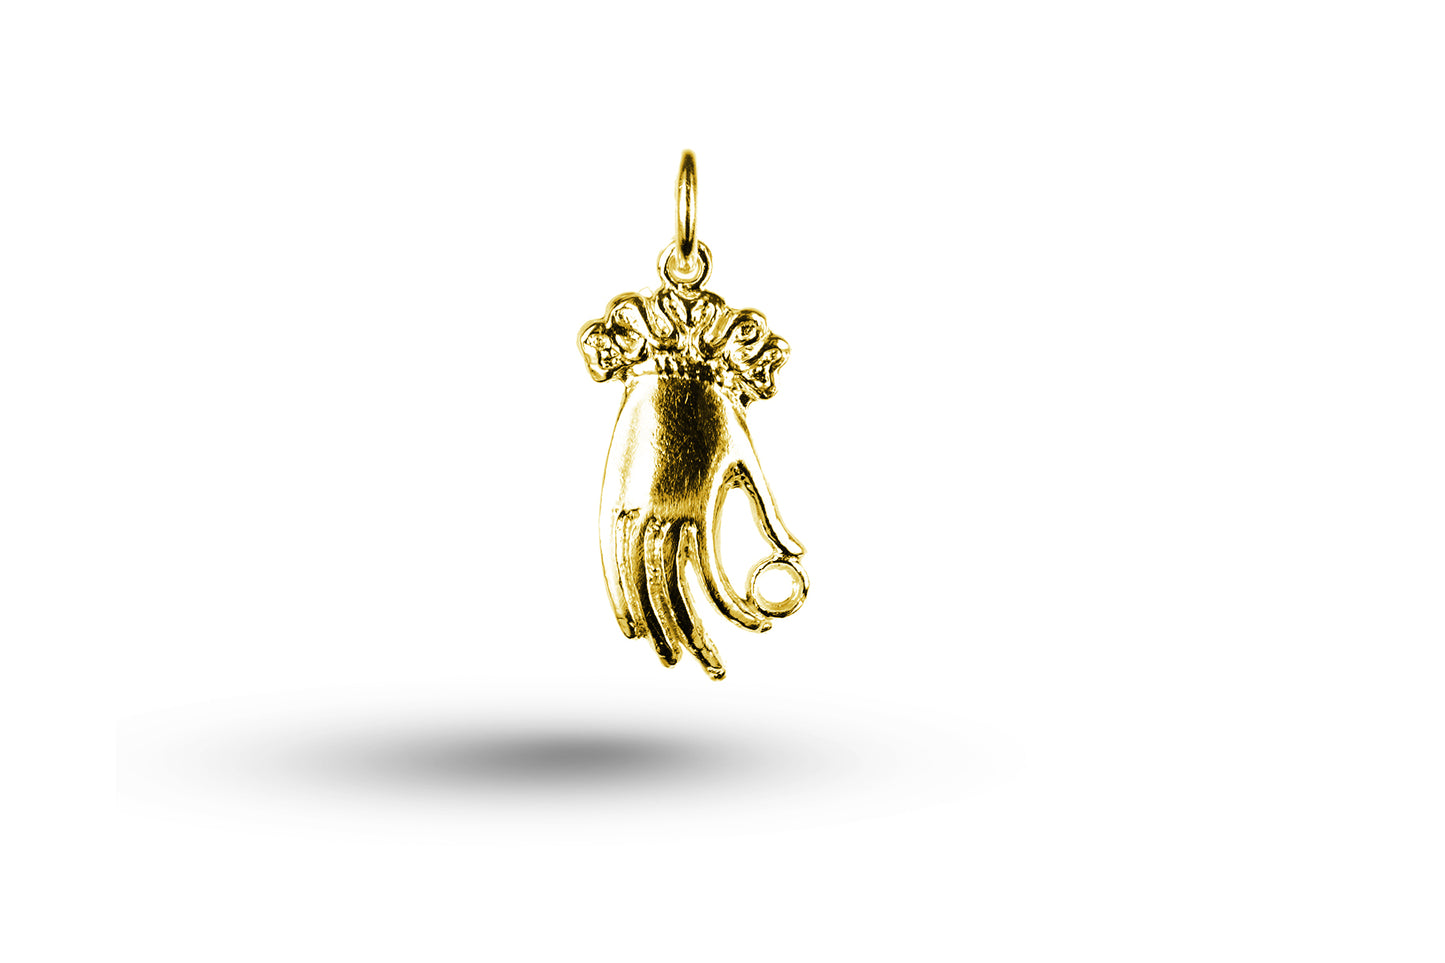 Luxury yellow gold Art Nouveau hand with ring charm.